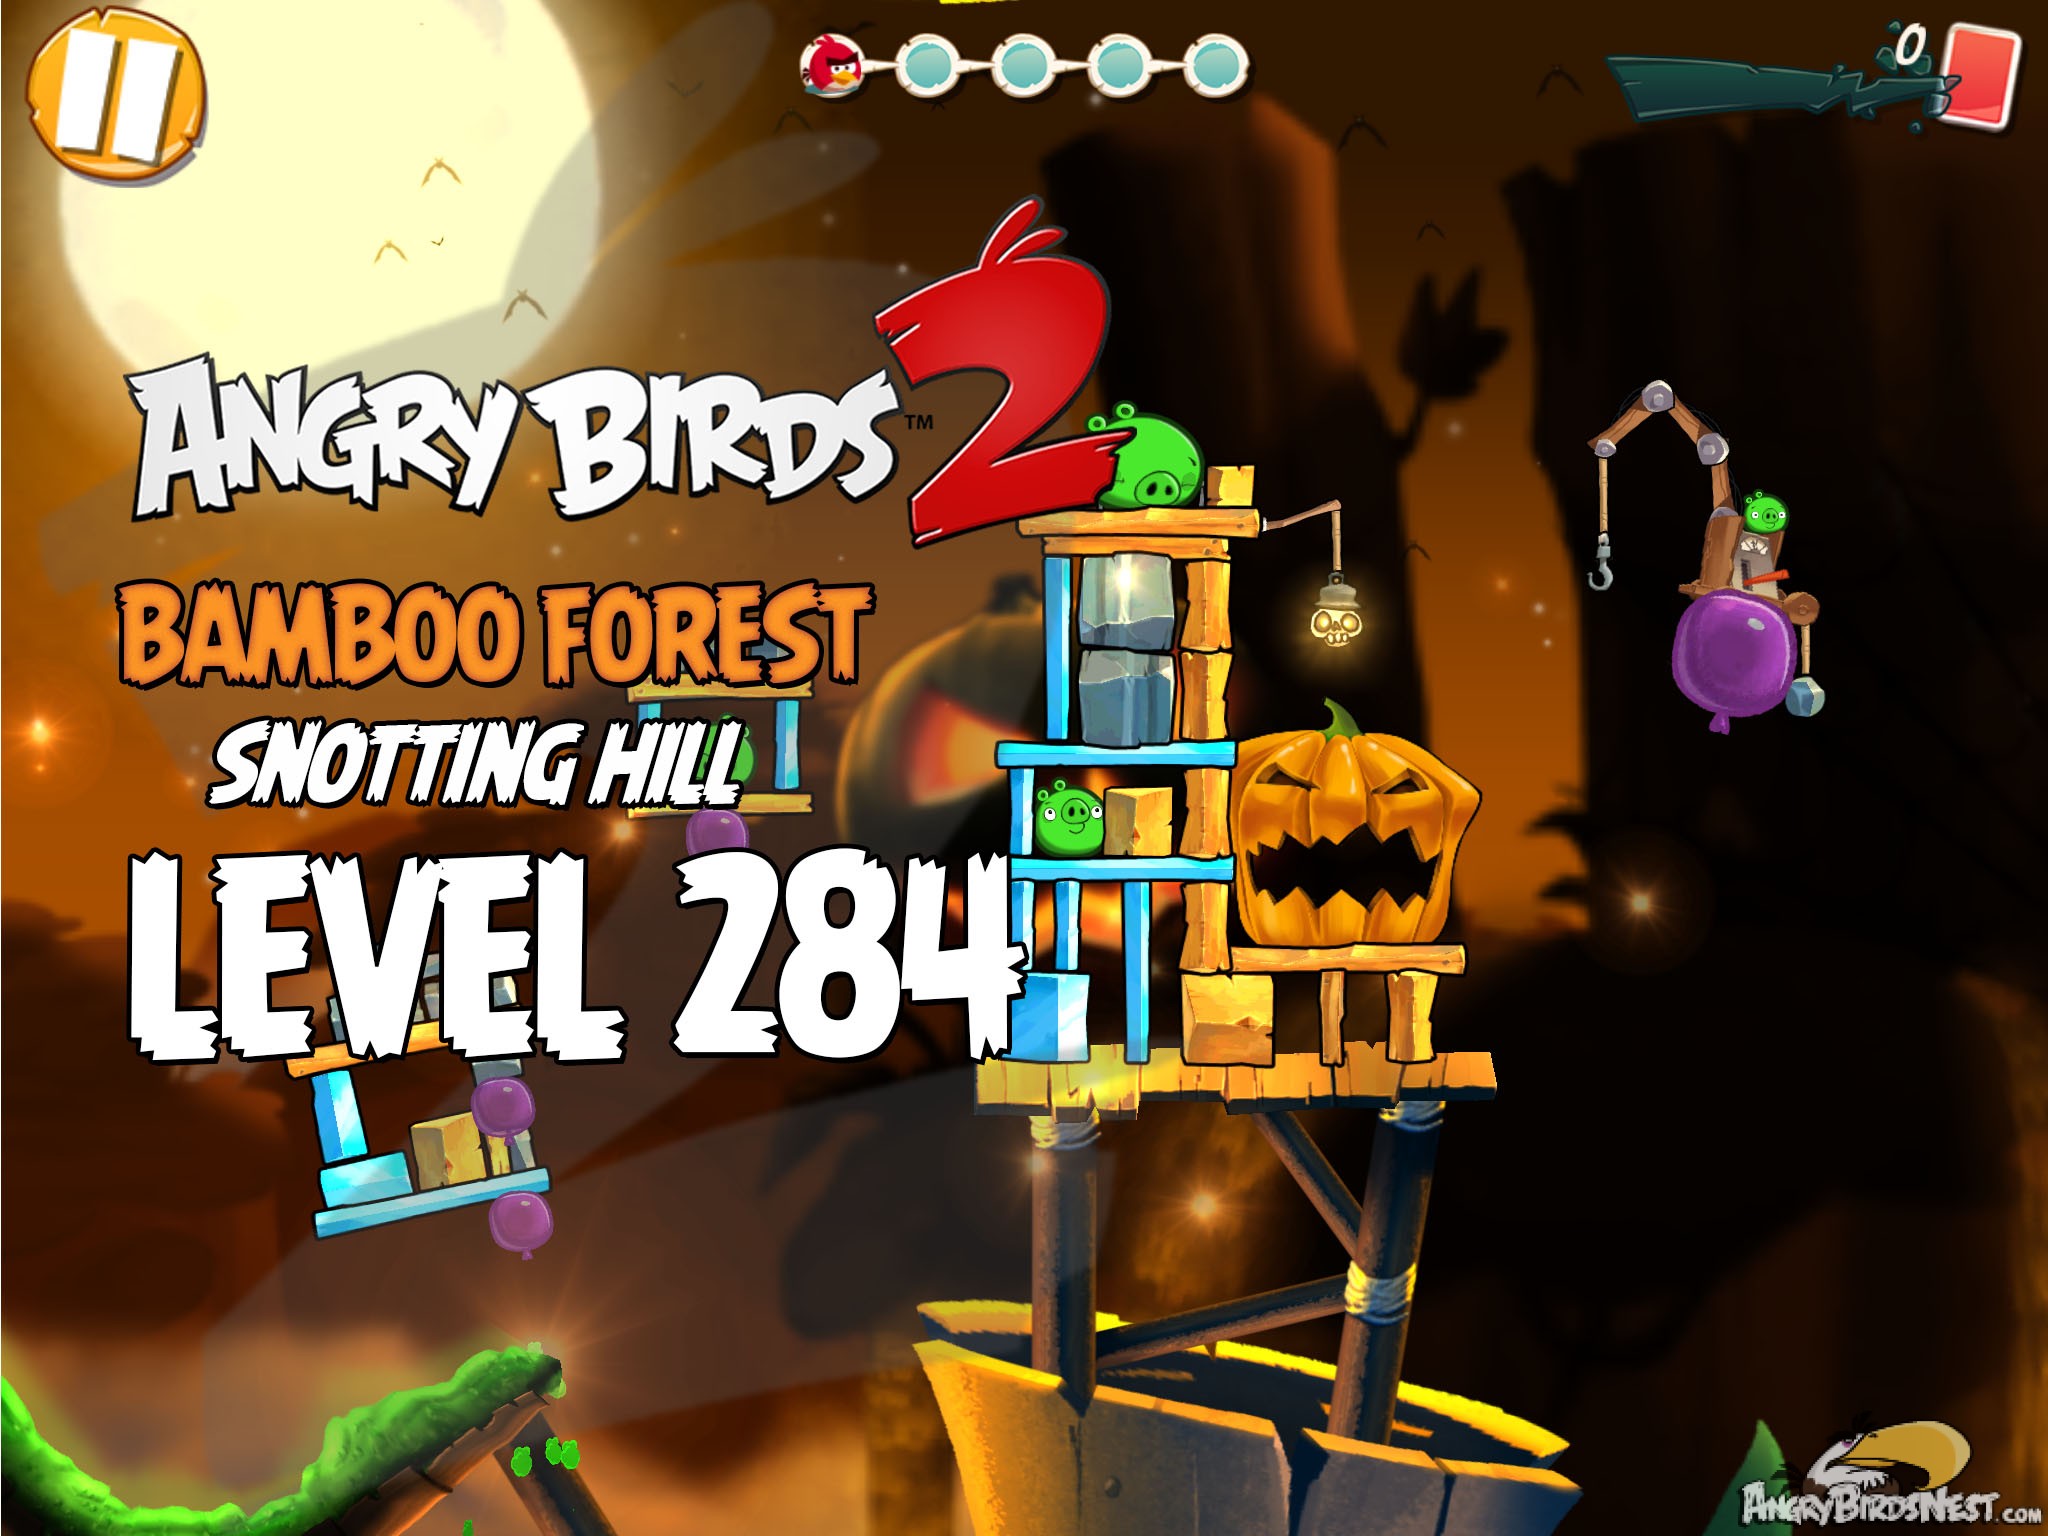 Angry Birds 2 Bambbo Forest Snotting Hill Level 284